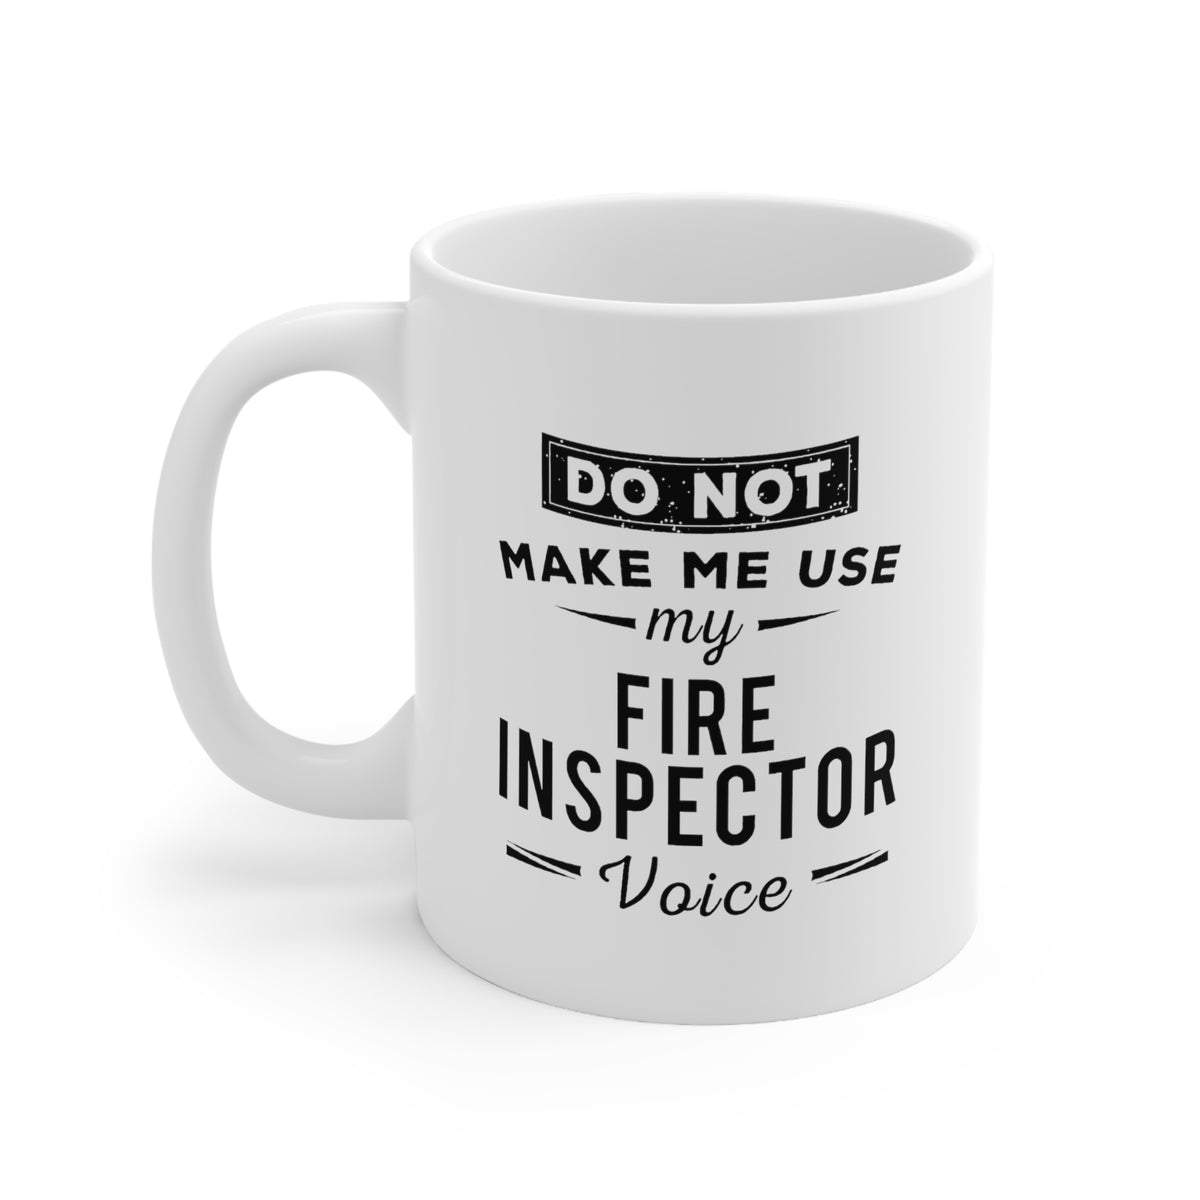 Fire inspector Coffee Mug - Fire inspector Voice Cup - Unique Funny Inspirational Gift for Men and Women